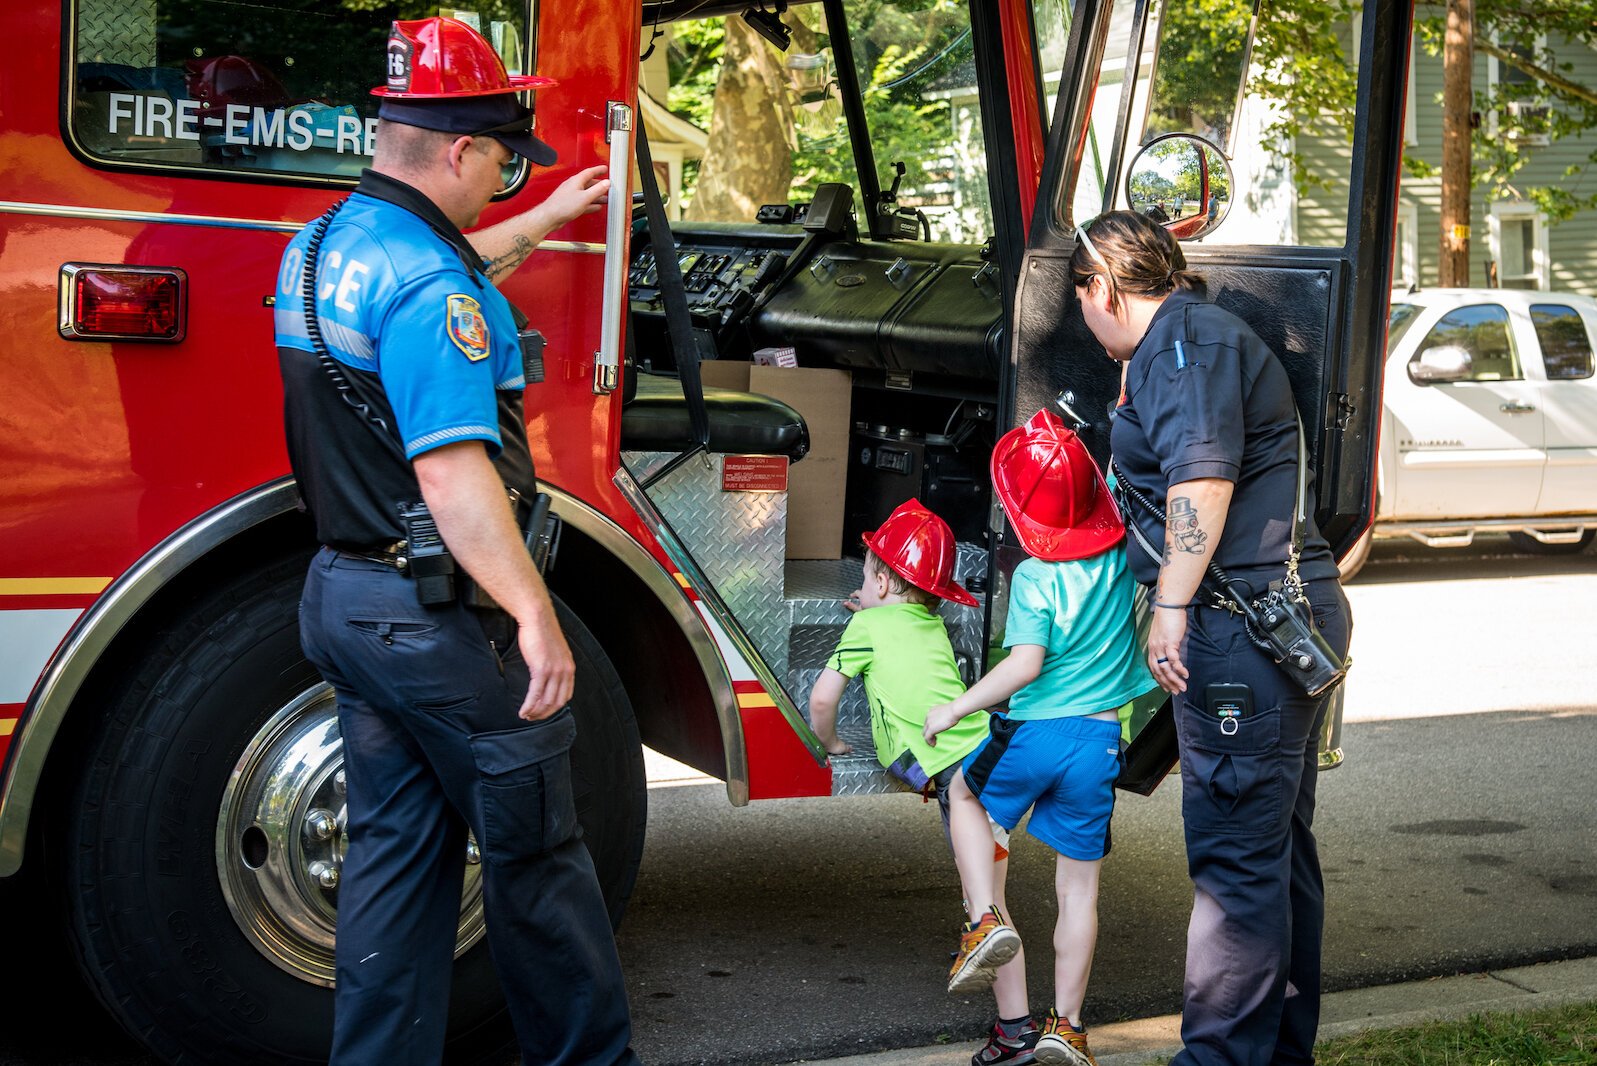 The KDPS fire trucks drew little ones the Vine Neighborhood celebration of National Night Out.  Photo by Fran Dwight